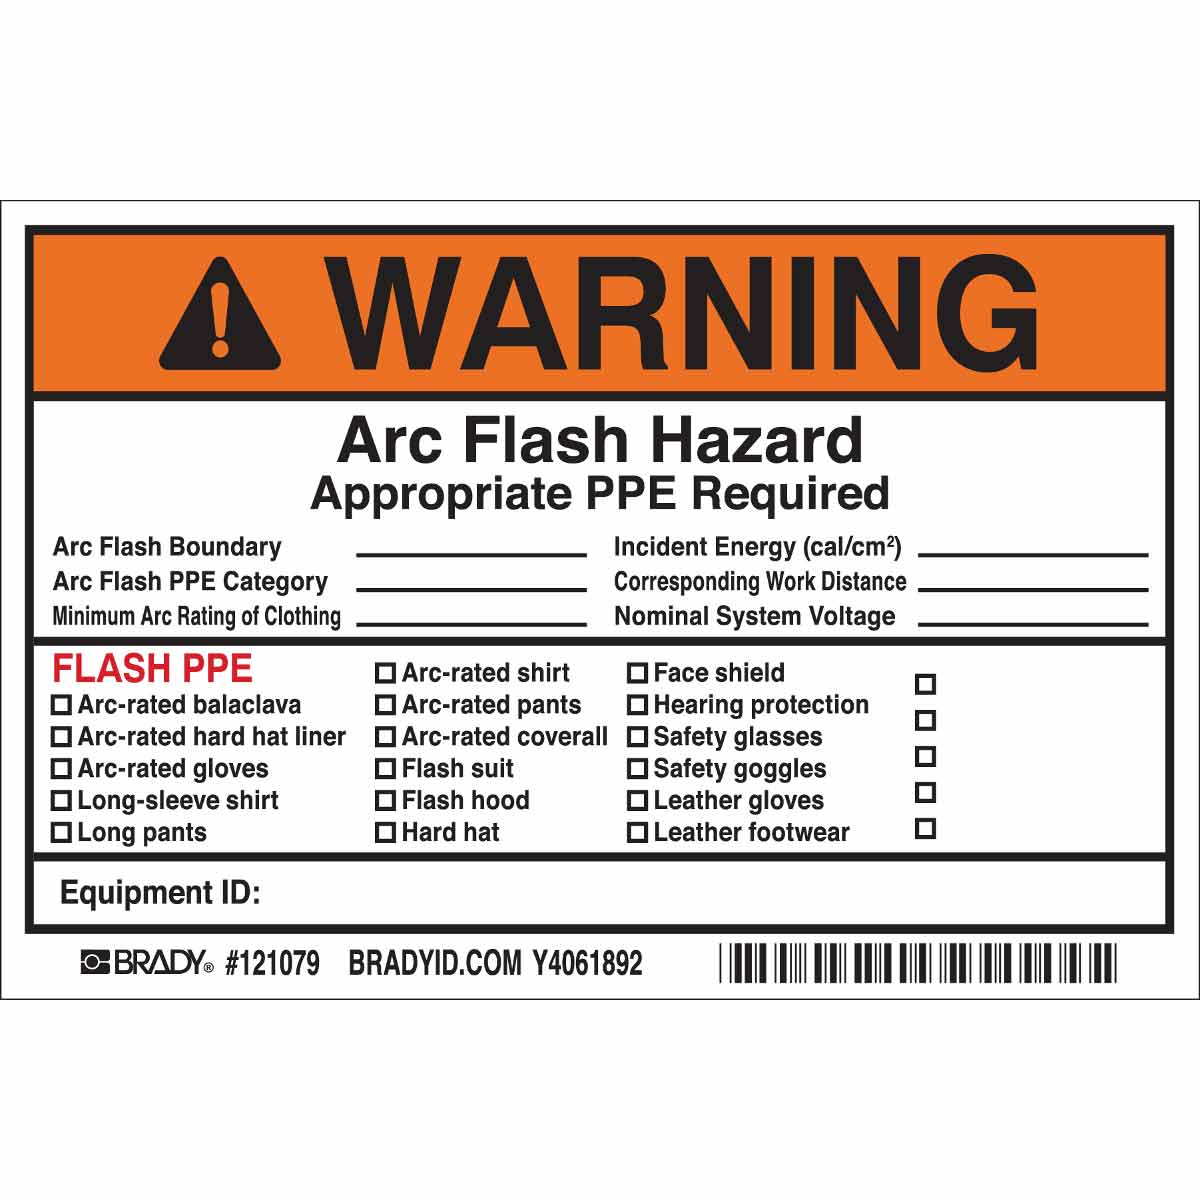 what is an arc flash boundary